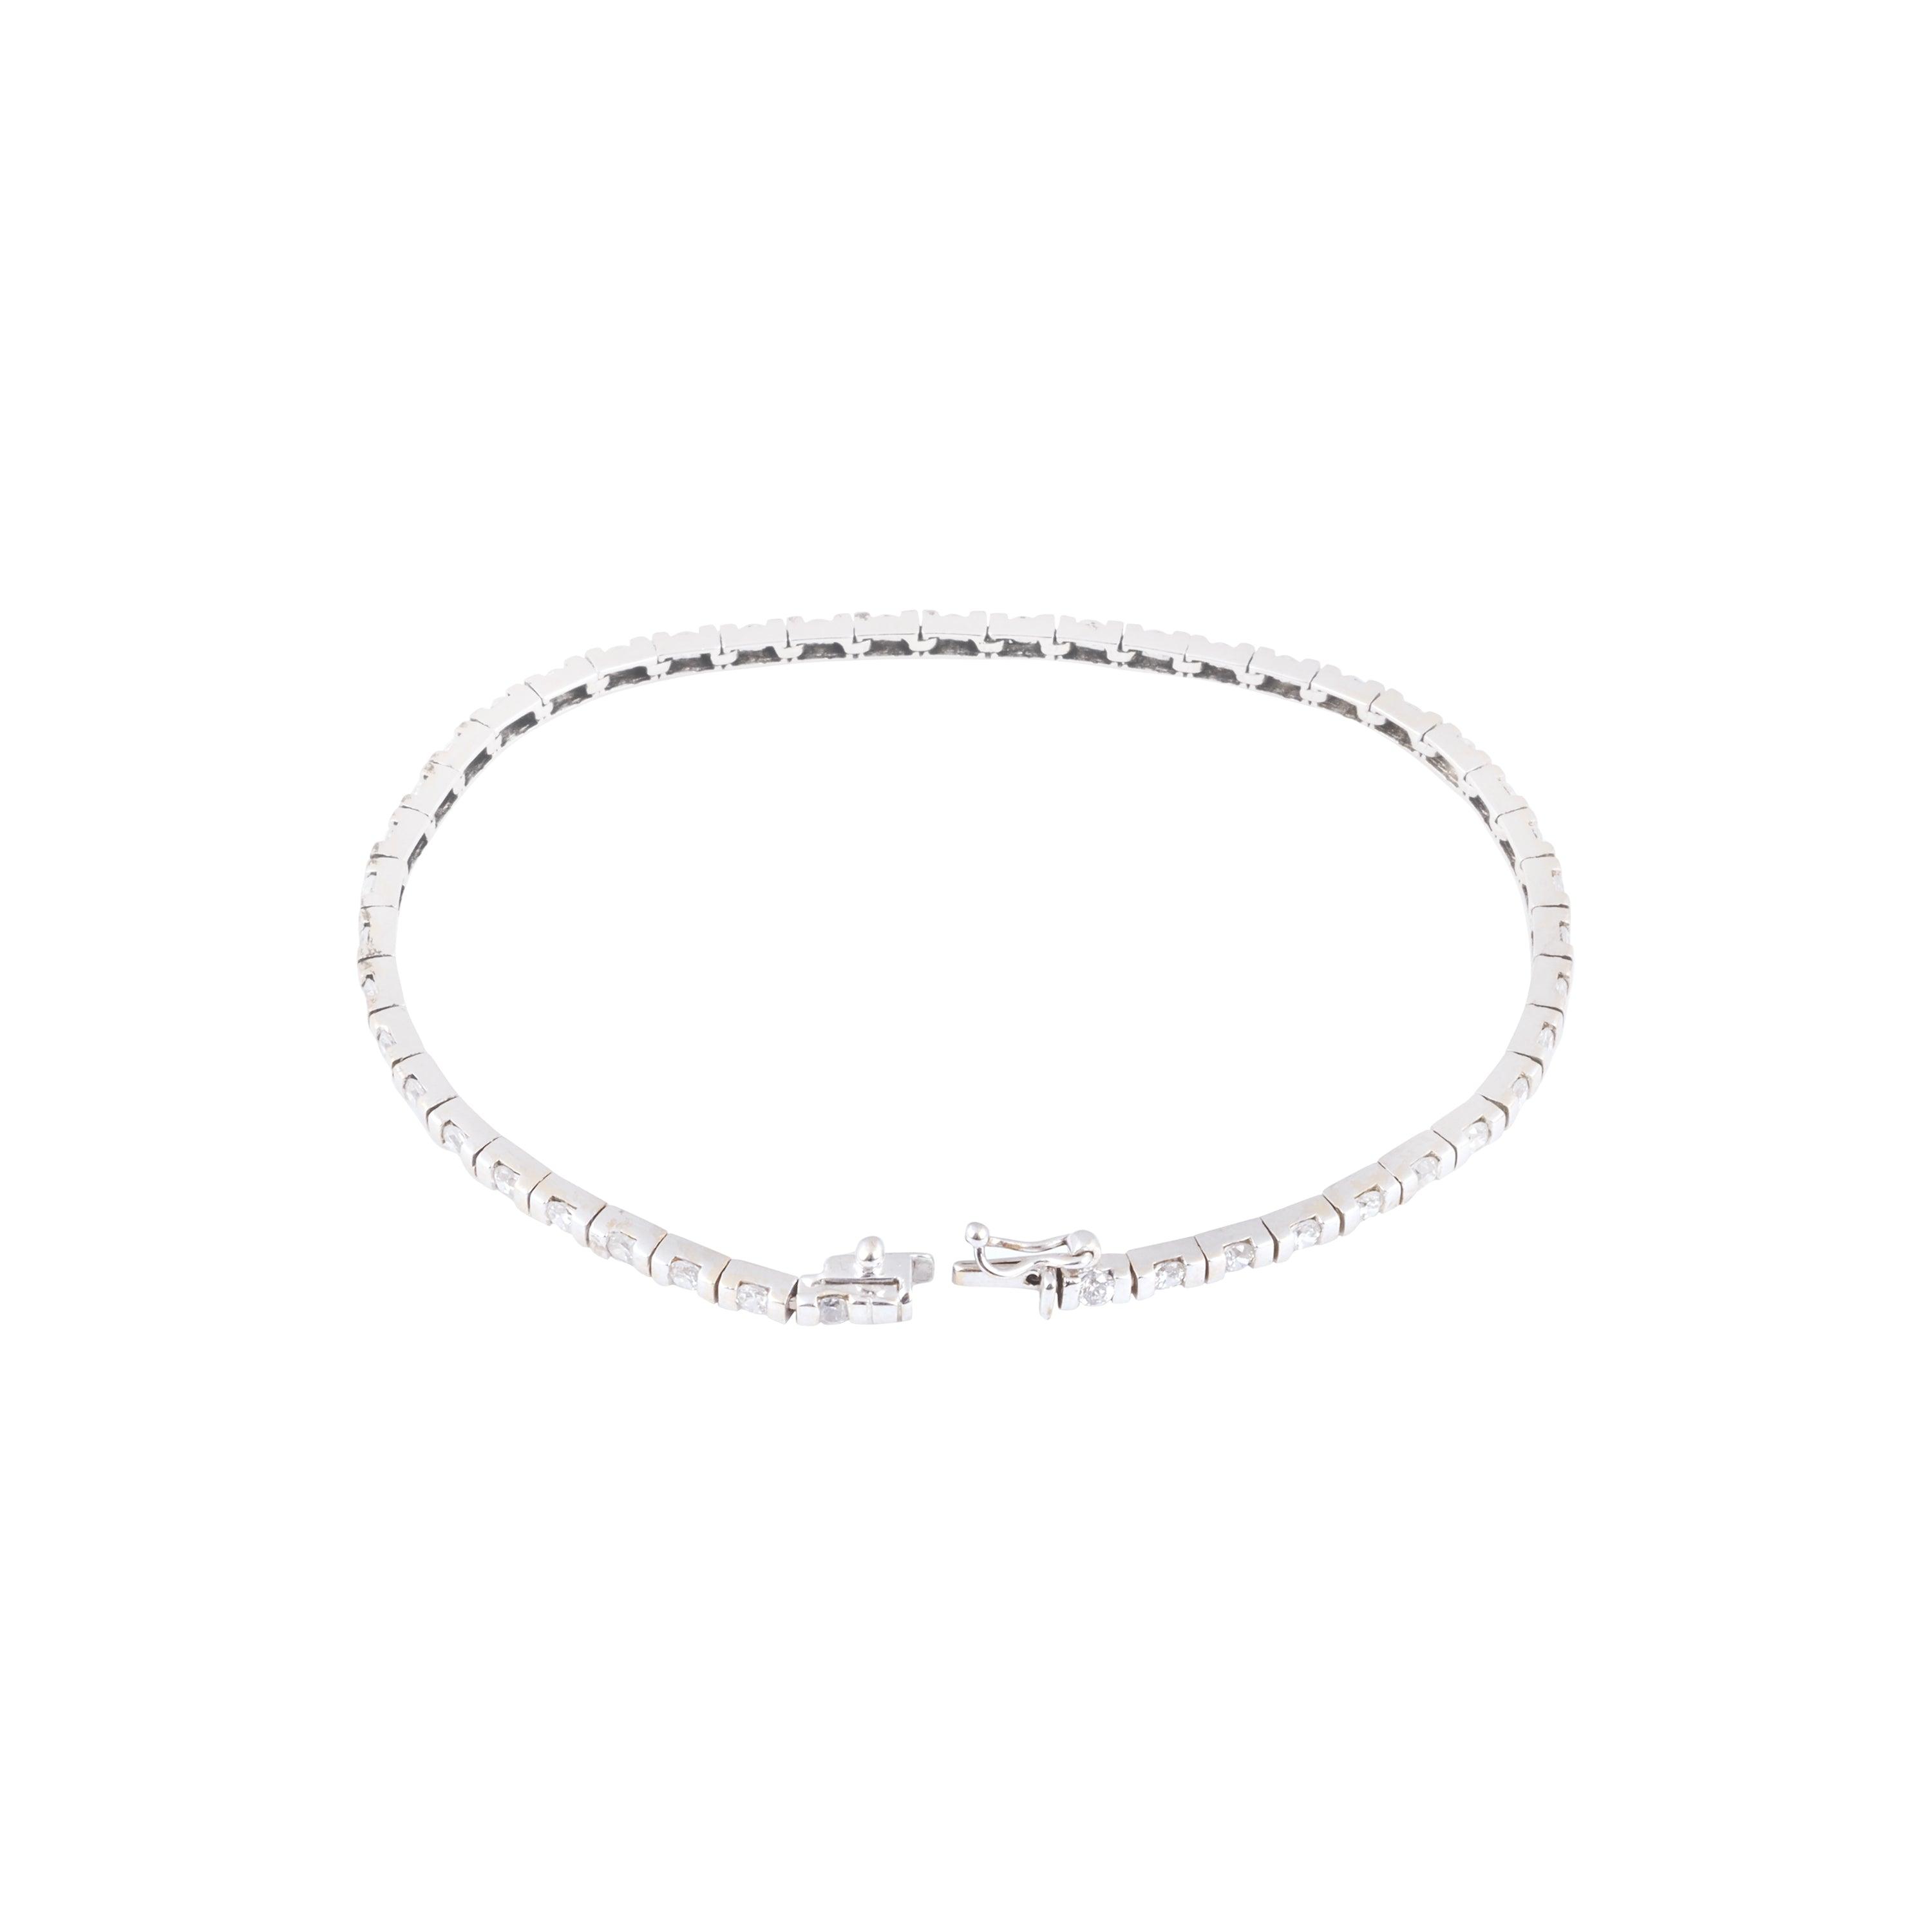 18ct White Gold Tennis Bracelet with Cubic Zirconia & Box Clasp LBR-8524